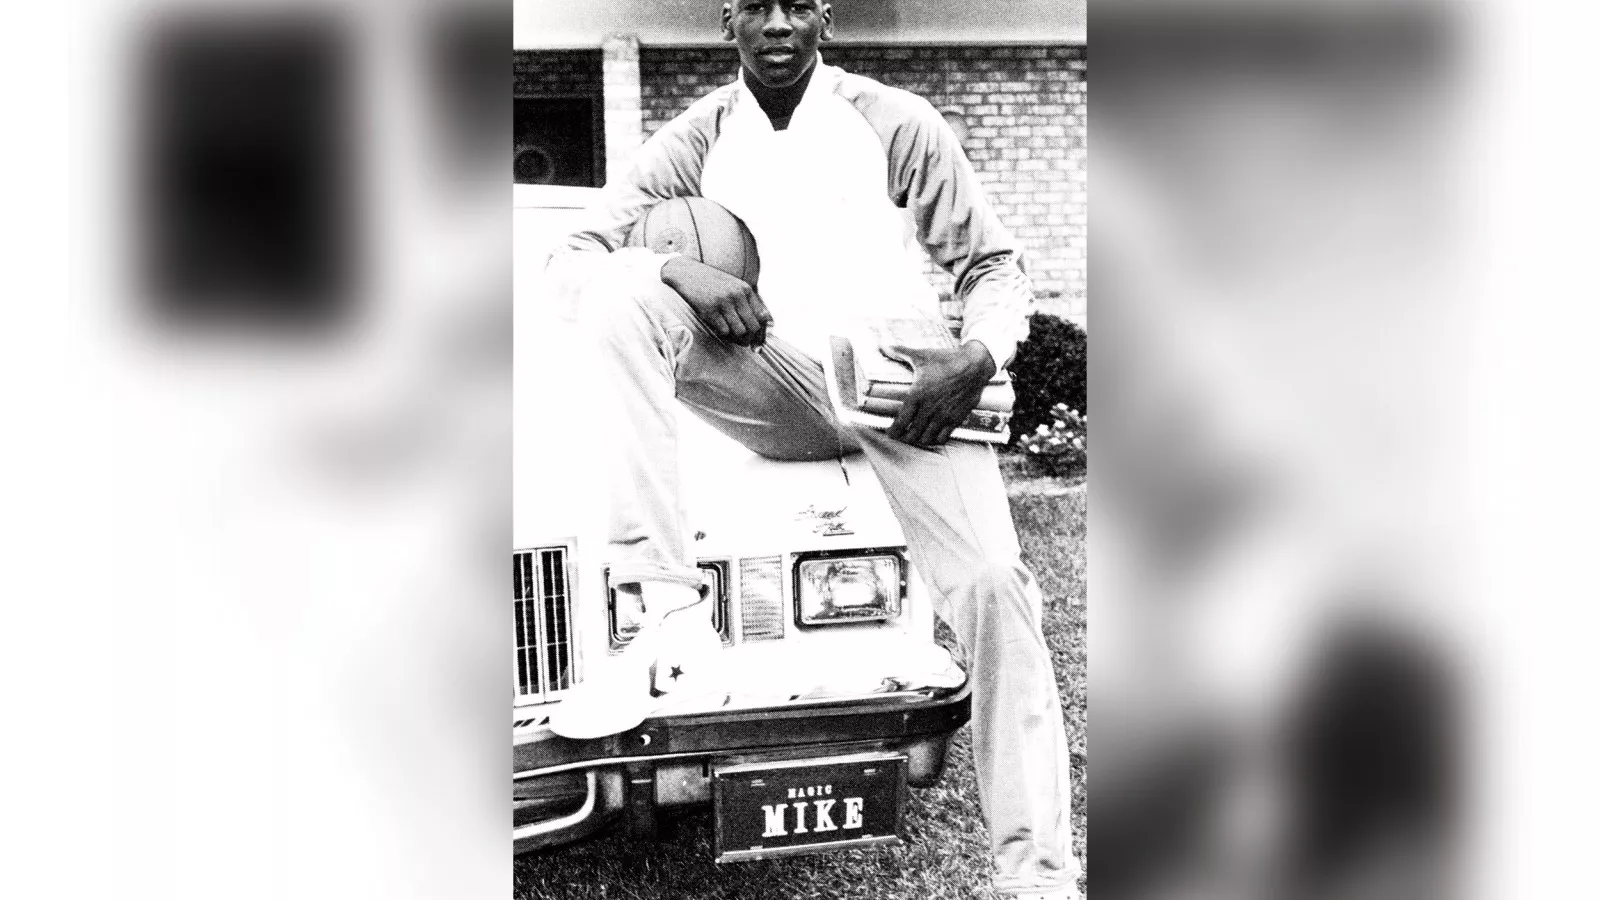 Teenage Michael Jordan 'cried in his room' after one of his closest friends  made the high school varsity team over him